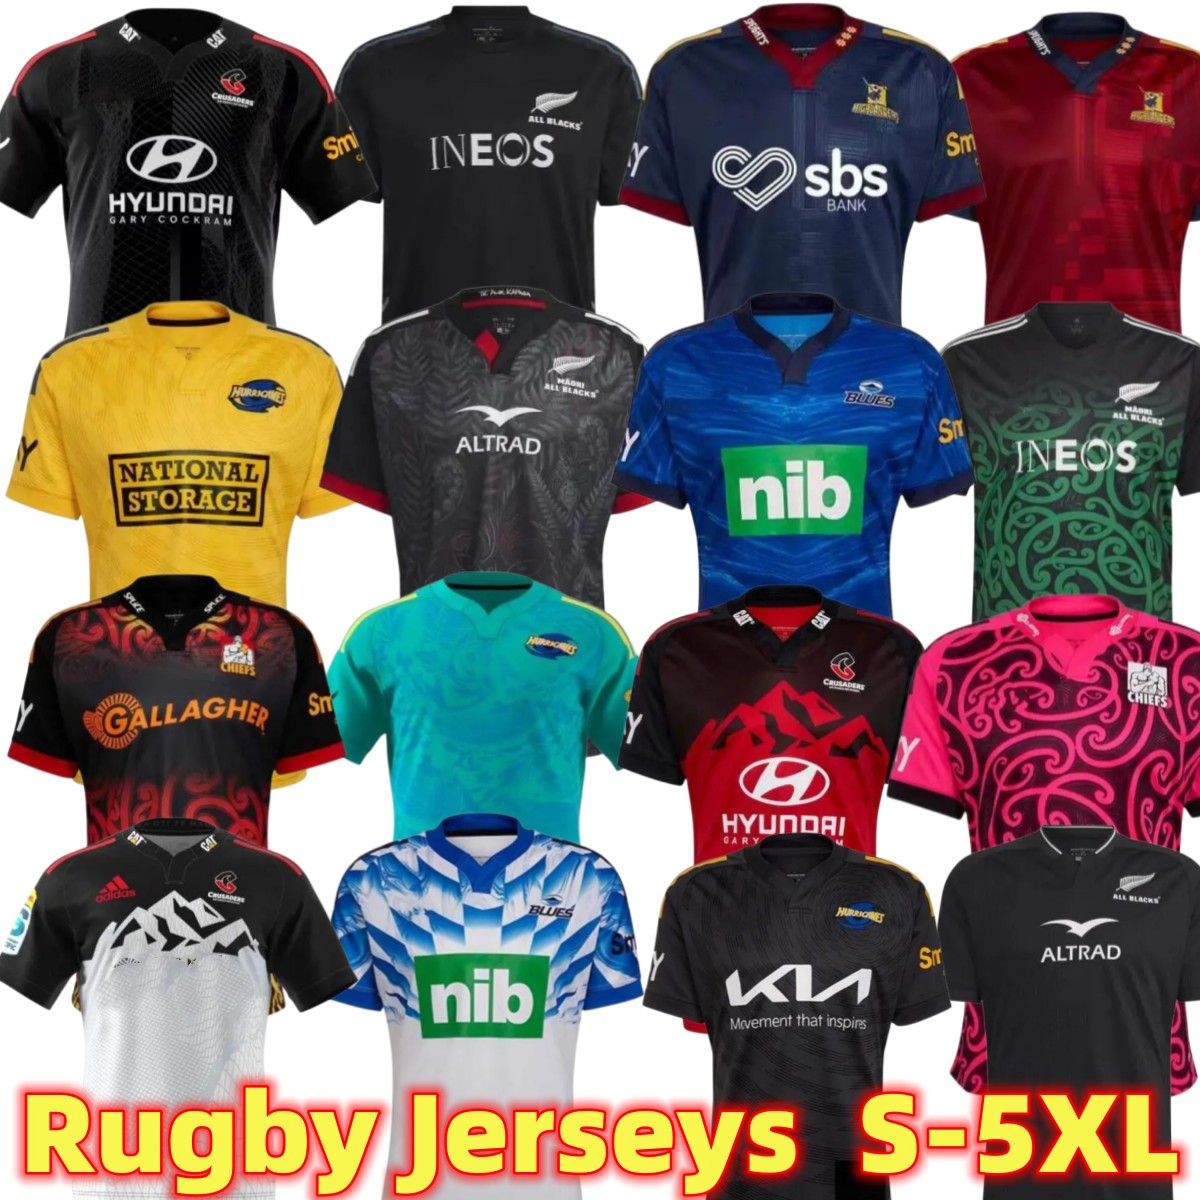 

22 23 NEW Hurricane Highlander Blues crusader RUGBY JERSEYS EMIRATES black 2023 all Men home Game away Super Moana Jersey top quality S-5XL